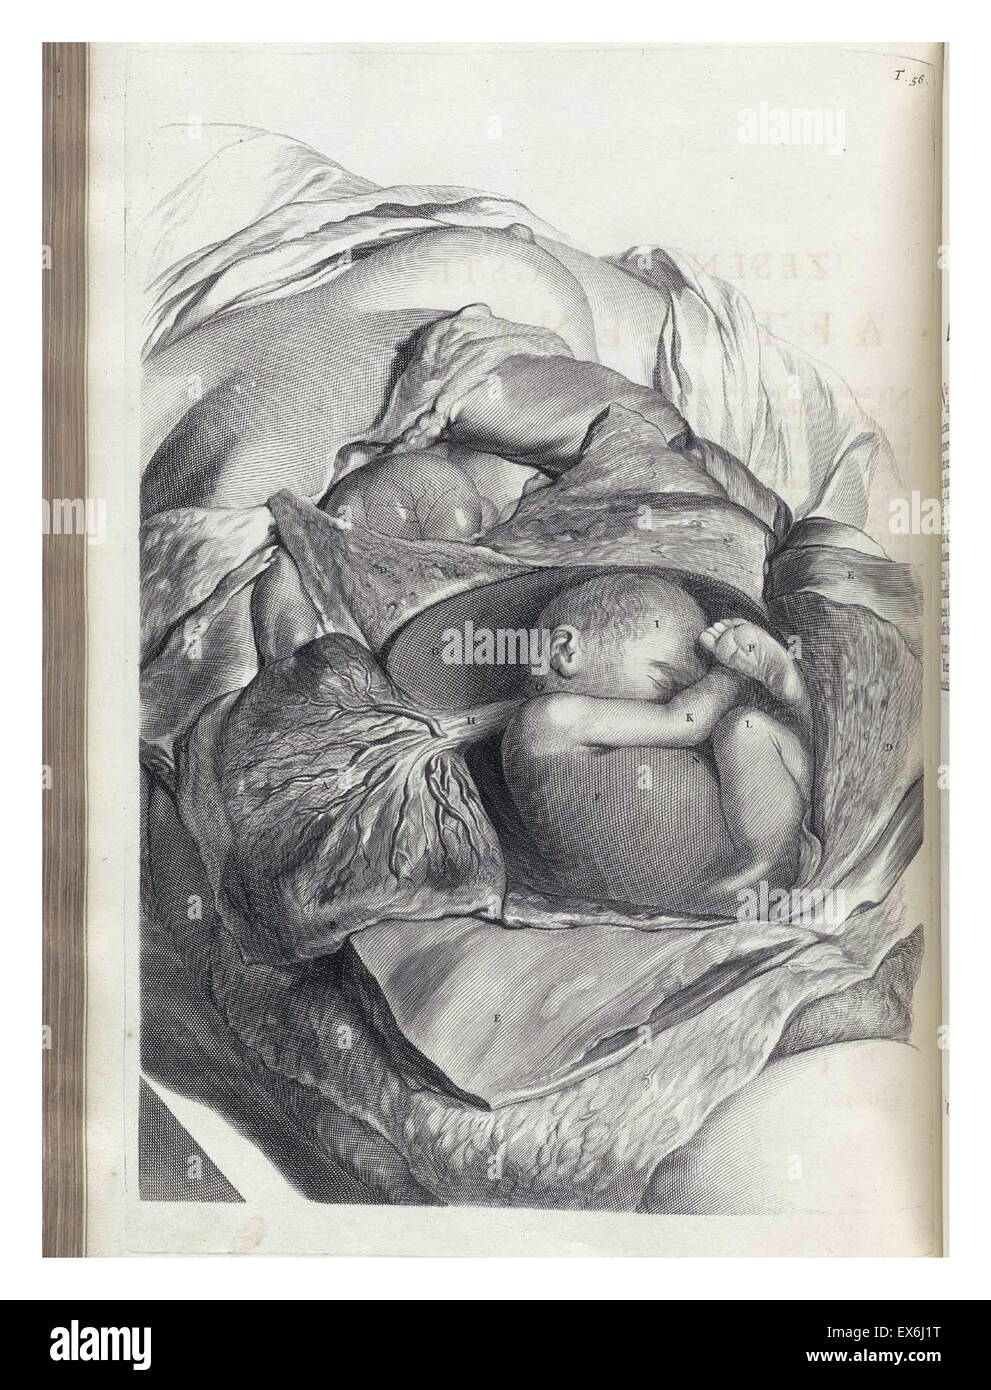 Illustrations by Govard Bidloo, from the anatomy textbook 'Ontleding des menschelyken Lichaams'. (Amsterdam 1690).Govard Bidloo was born in Amsterdam in 1649 and became professor of anatomy at The Hague from 1688 to 1707 Stock Photo